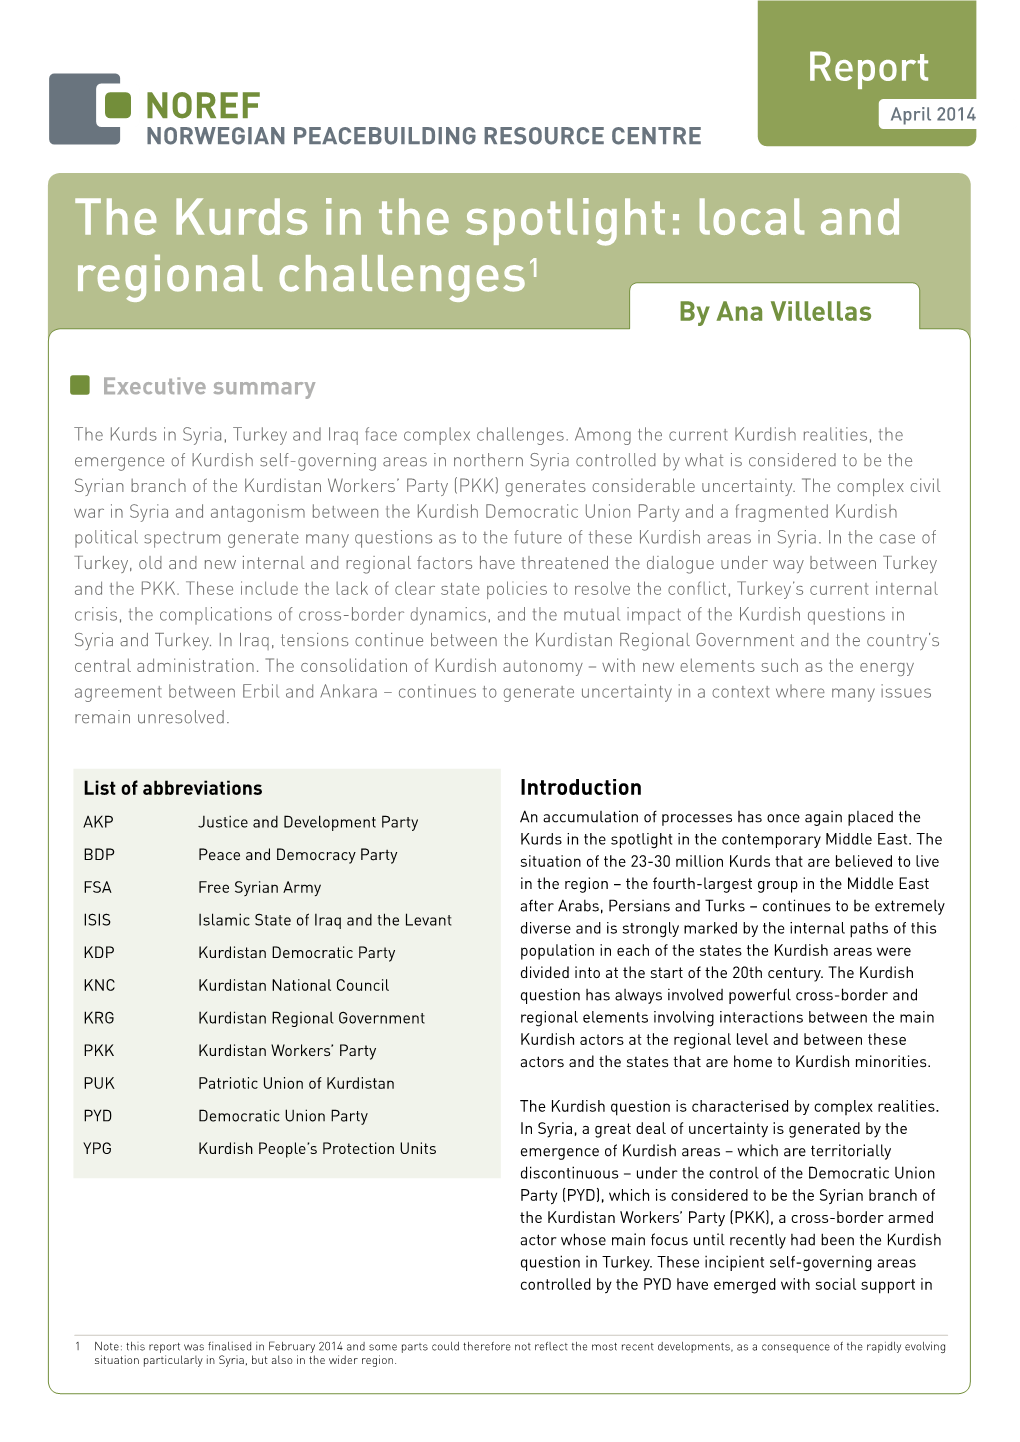 The Kurds in the Spotlight: Local and Regional Challenges1